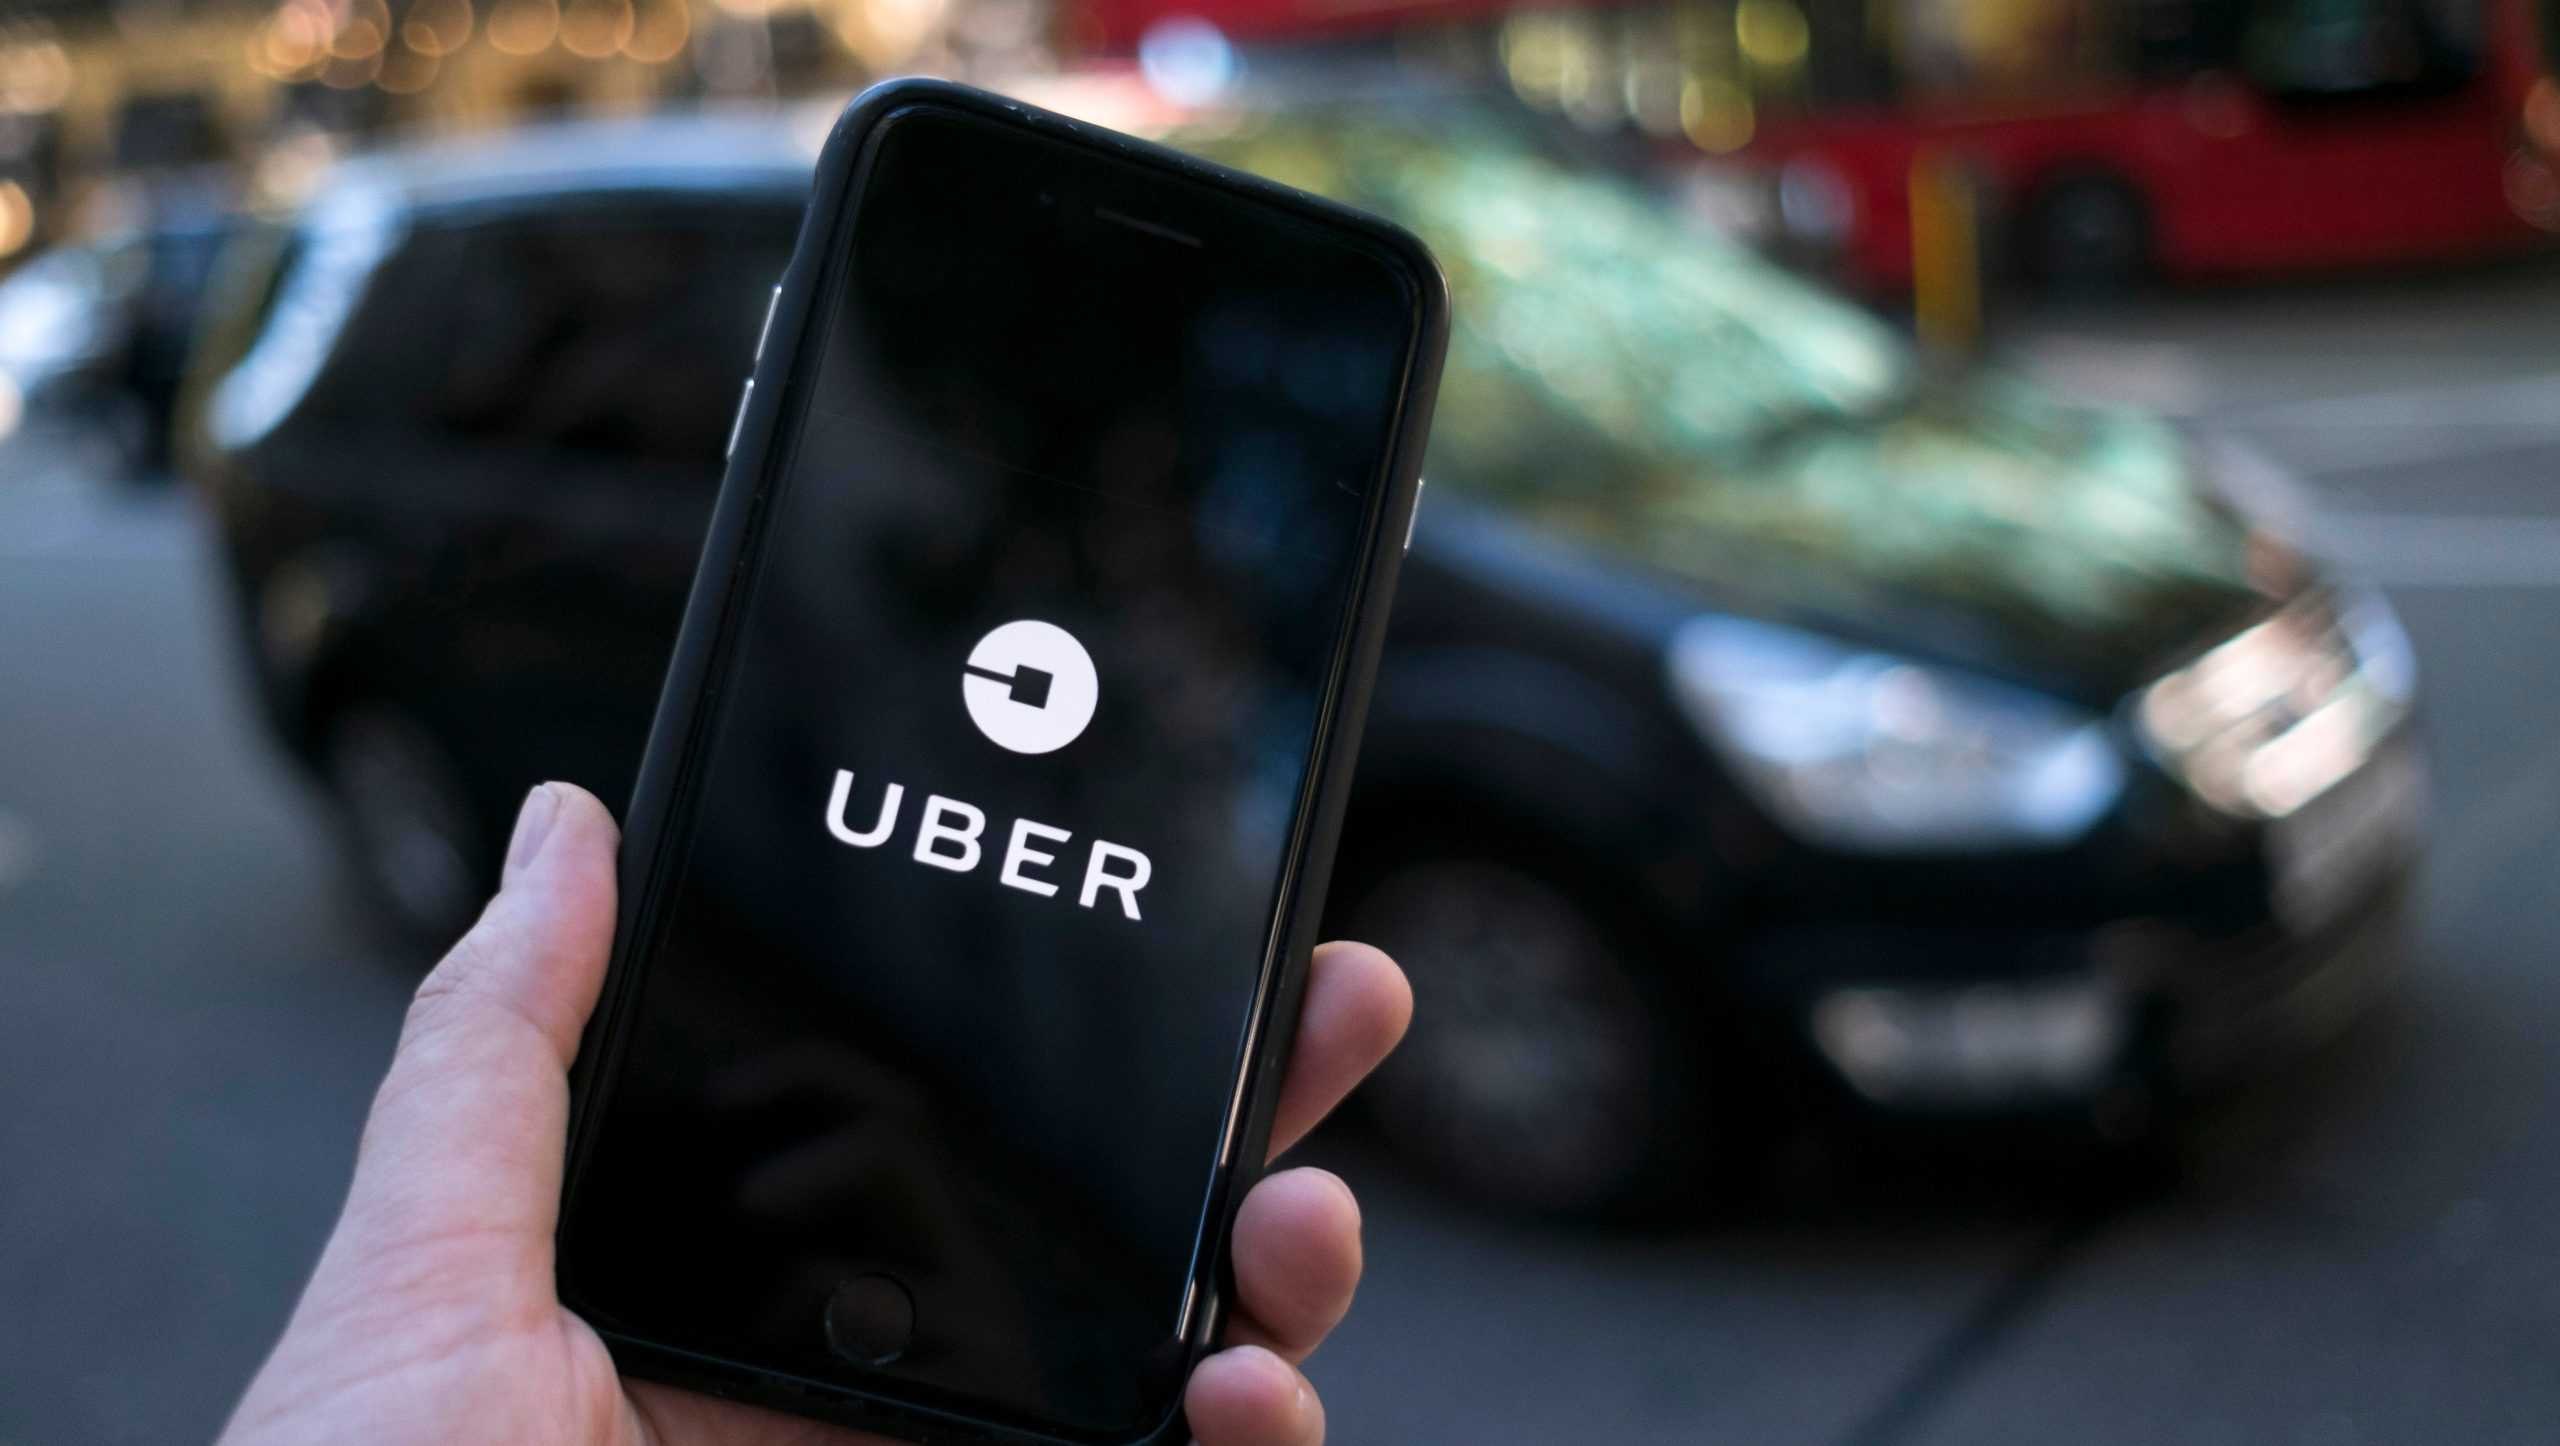 Uber launches API complete with 11 Partners: OpenTable, Hinge, United